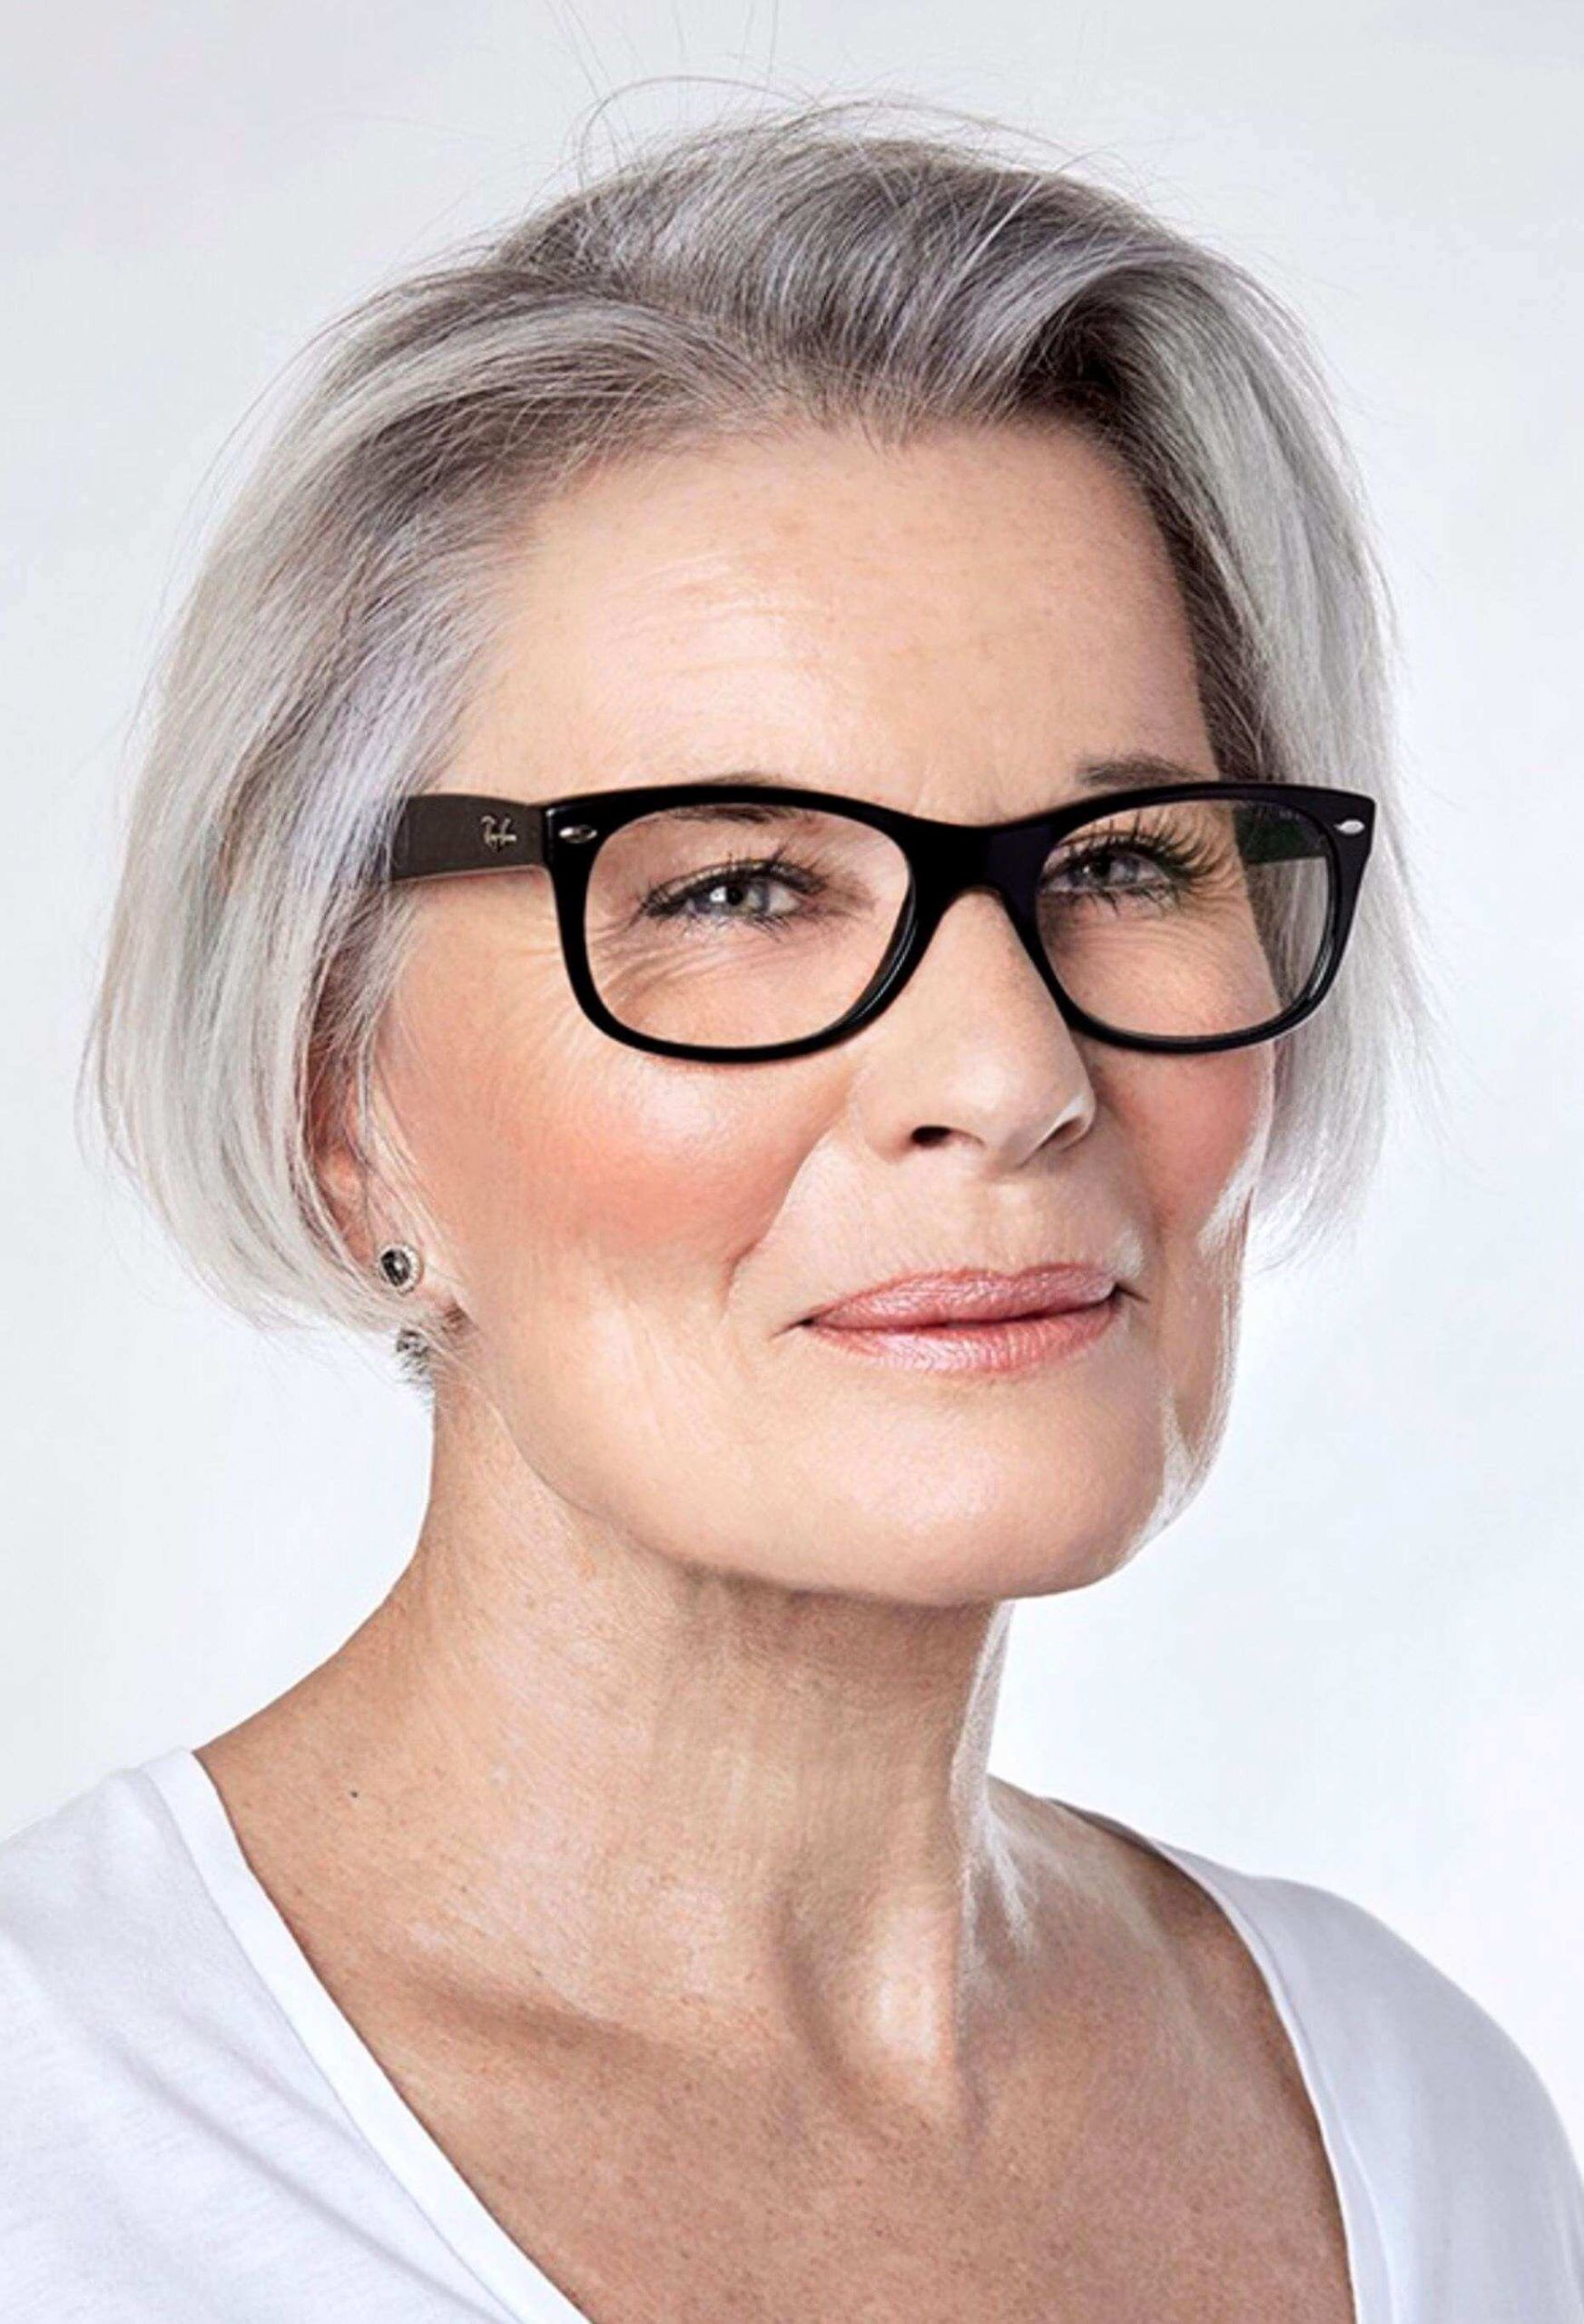 Short Haircuts For Women With Glasses
 60 Hairstyles for Women Over 50 with Glasses